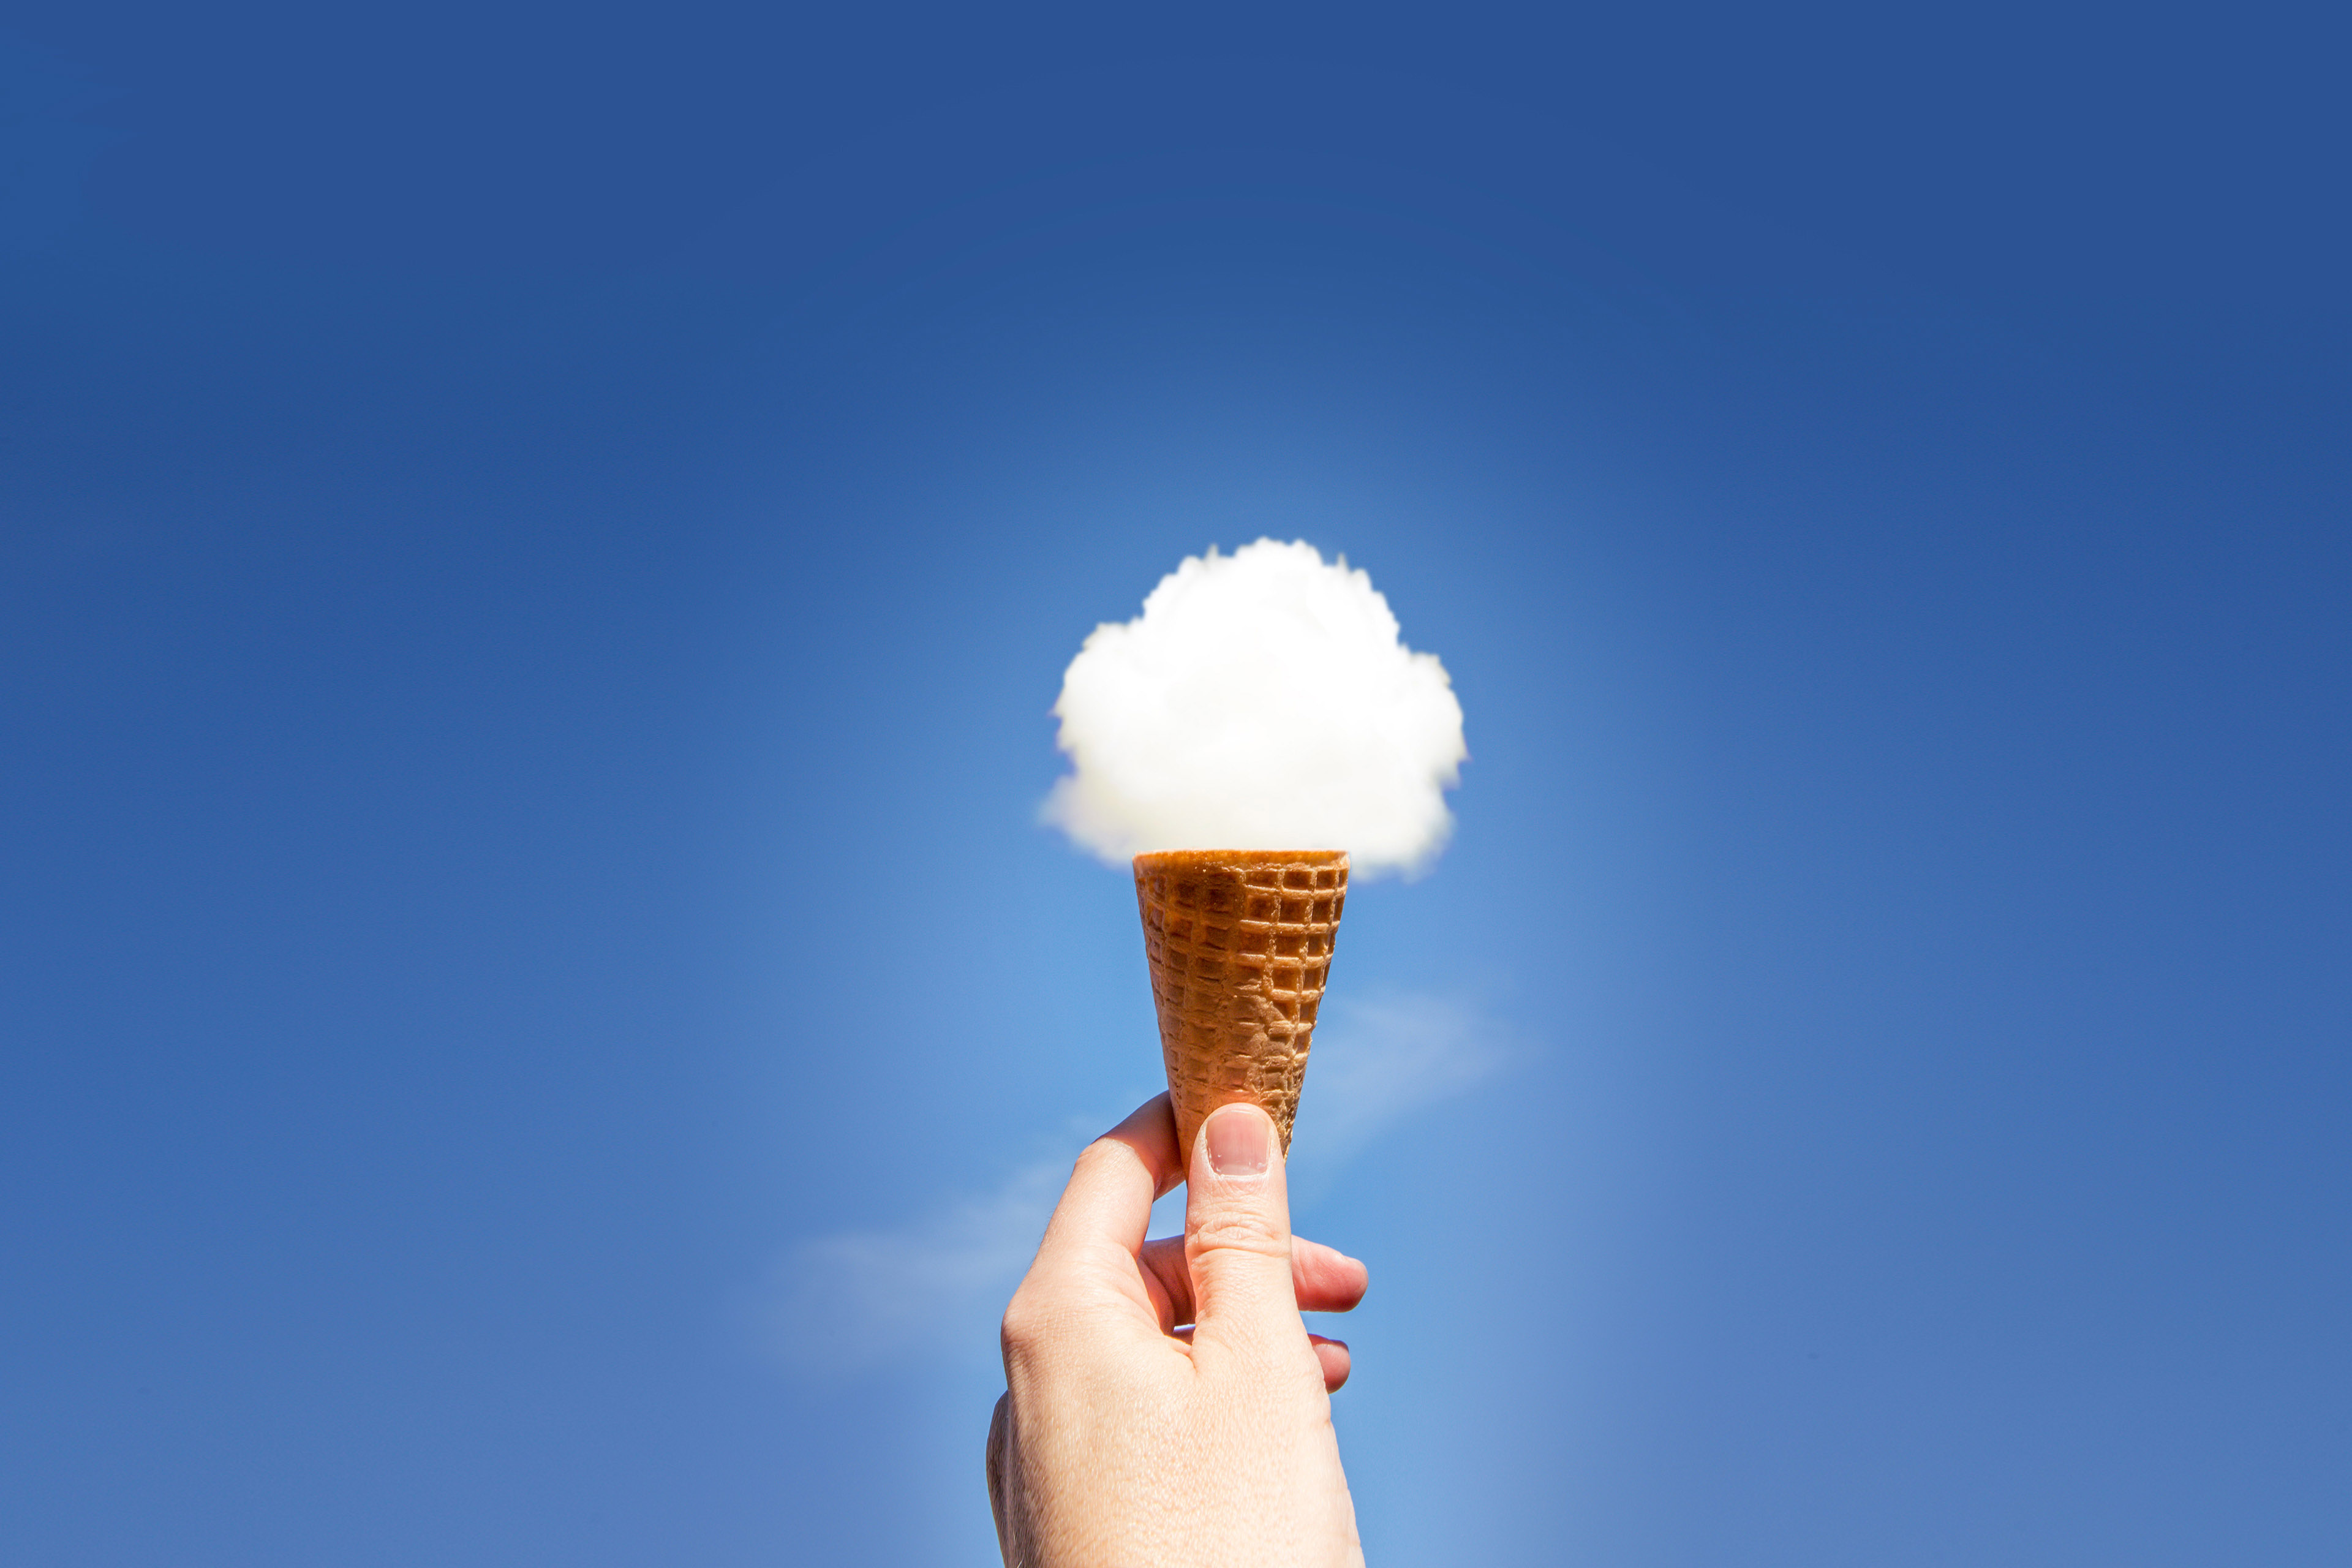 https://assets.ey.com/content/dam/ey-sites/ey-com/en_us/topics/unlocking-ambitions-of-private-businesses-and-their-owners/ey-cloud-ice-cream.jpg